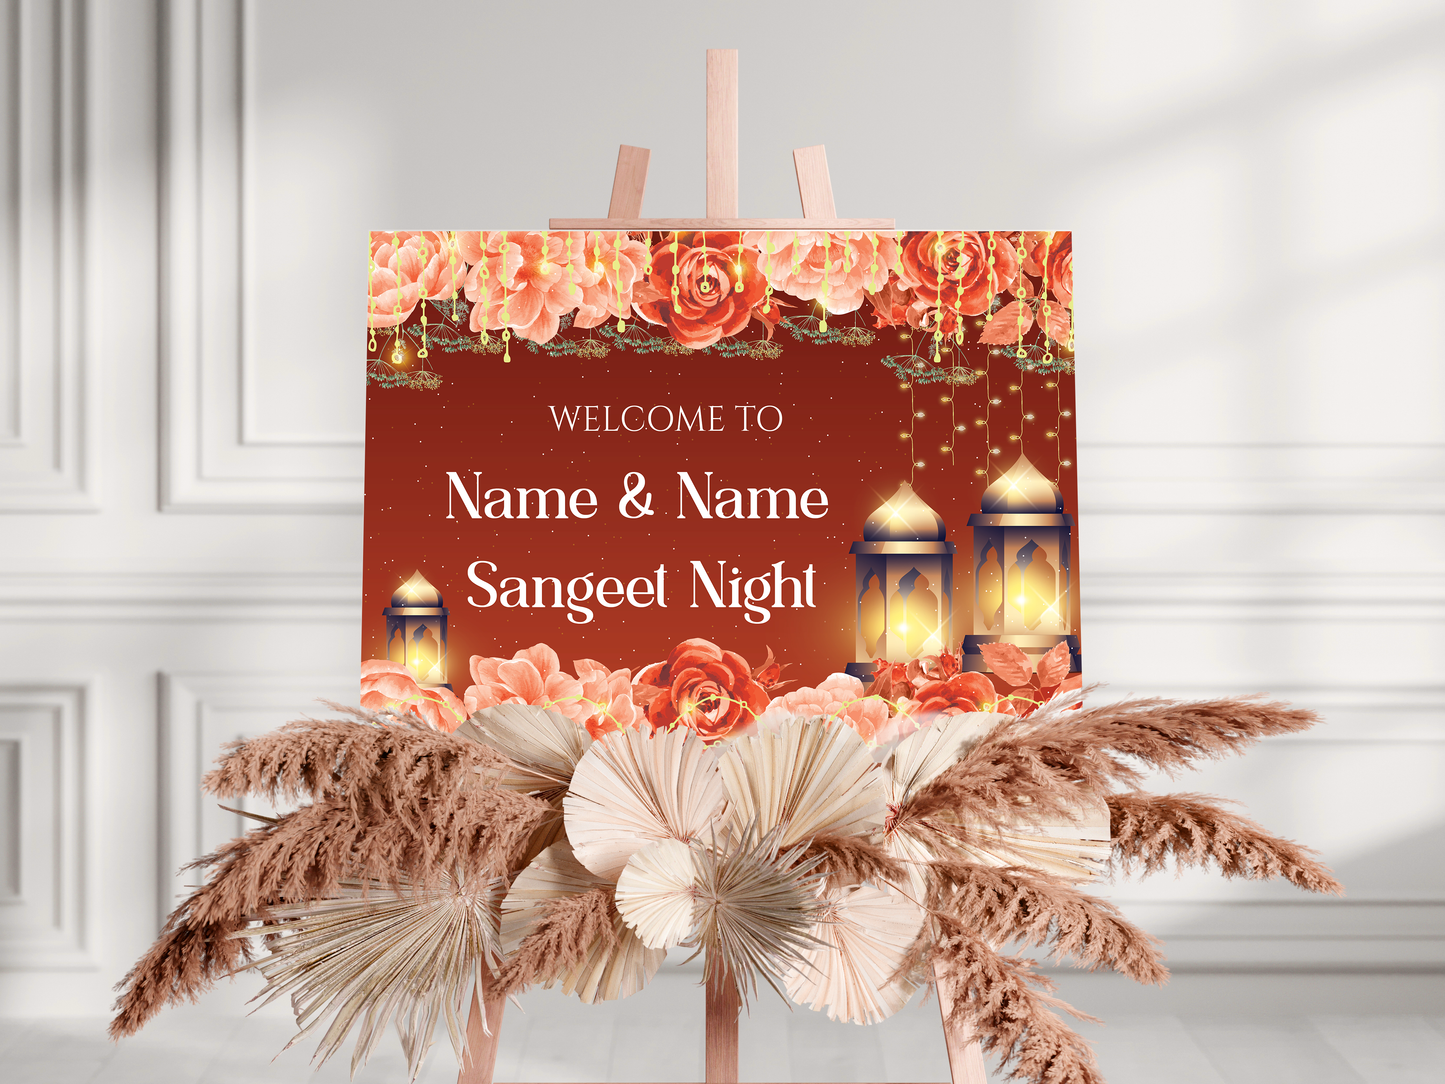 Sangeet Welcome Sign, Sangeet Night Sign, Wedding Sign, A1, A2, A3 or A4, Wedding Décor, Indian Sangeet Welcome Sign, Printed Sign Board